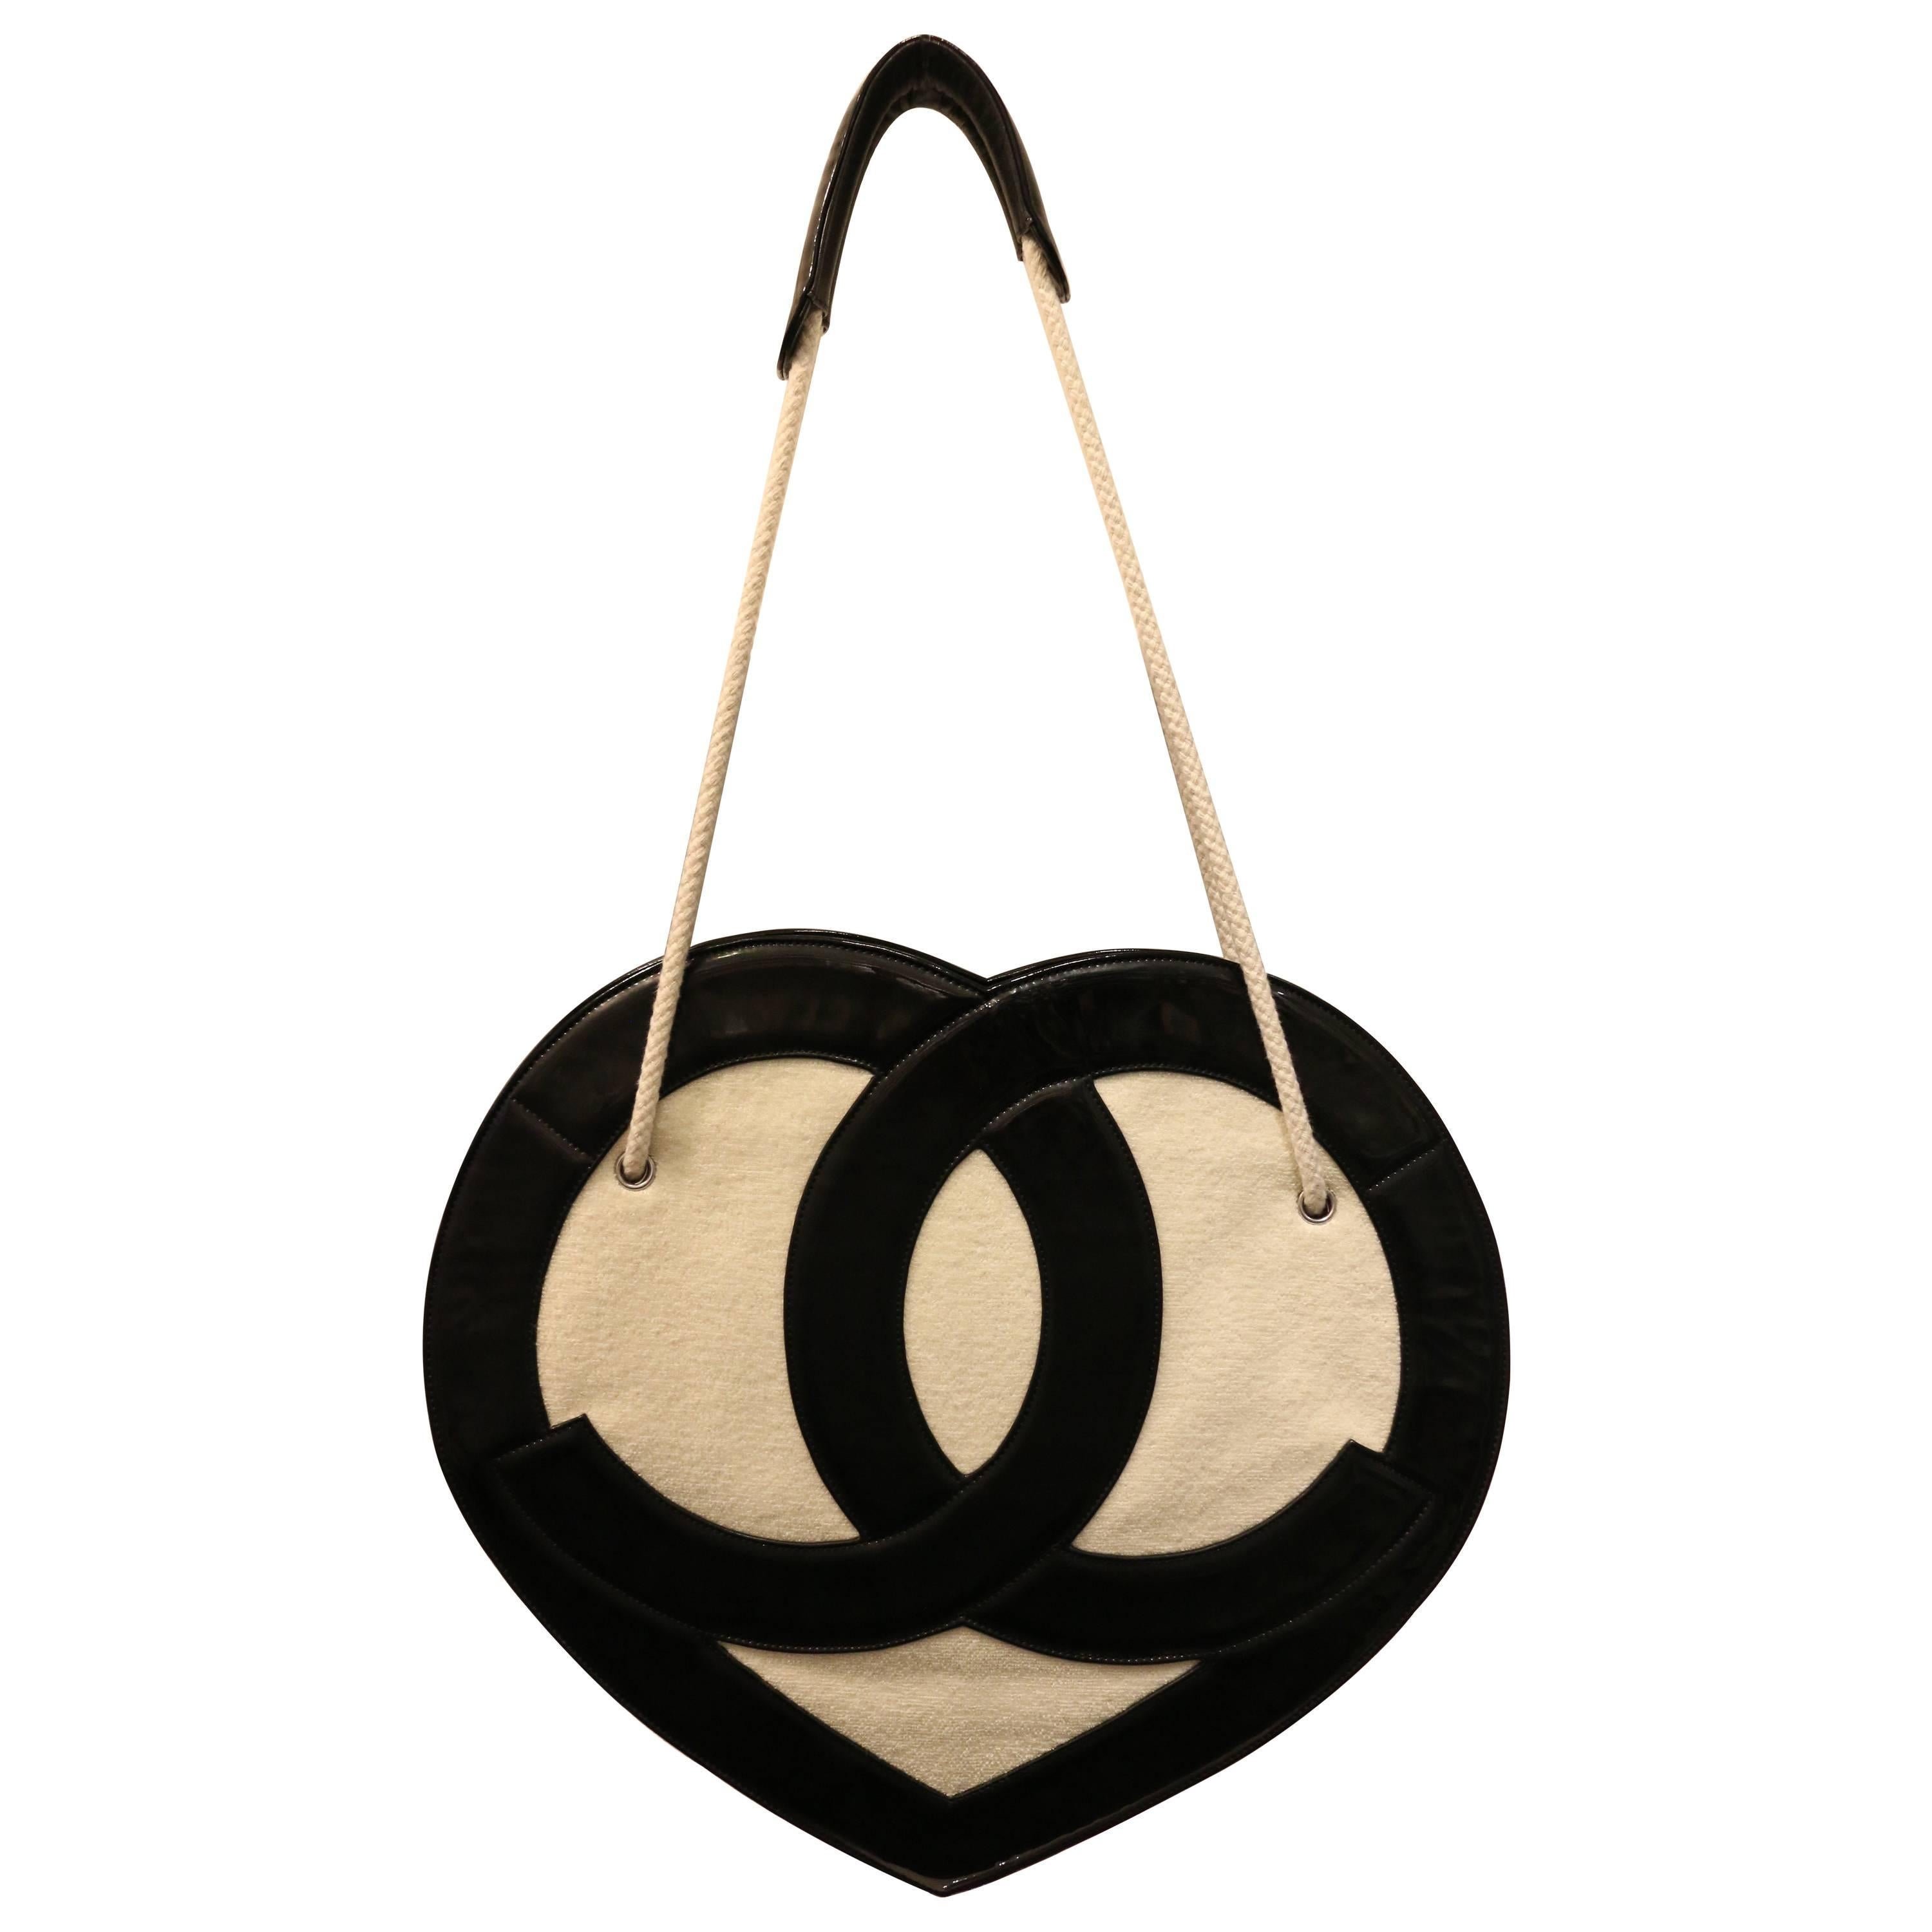 Chanel Terry "CC" Heart Shaped Shoulder Bag 